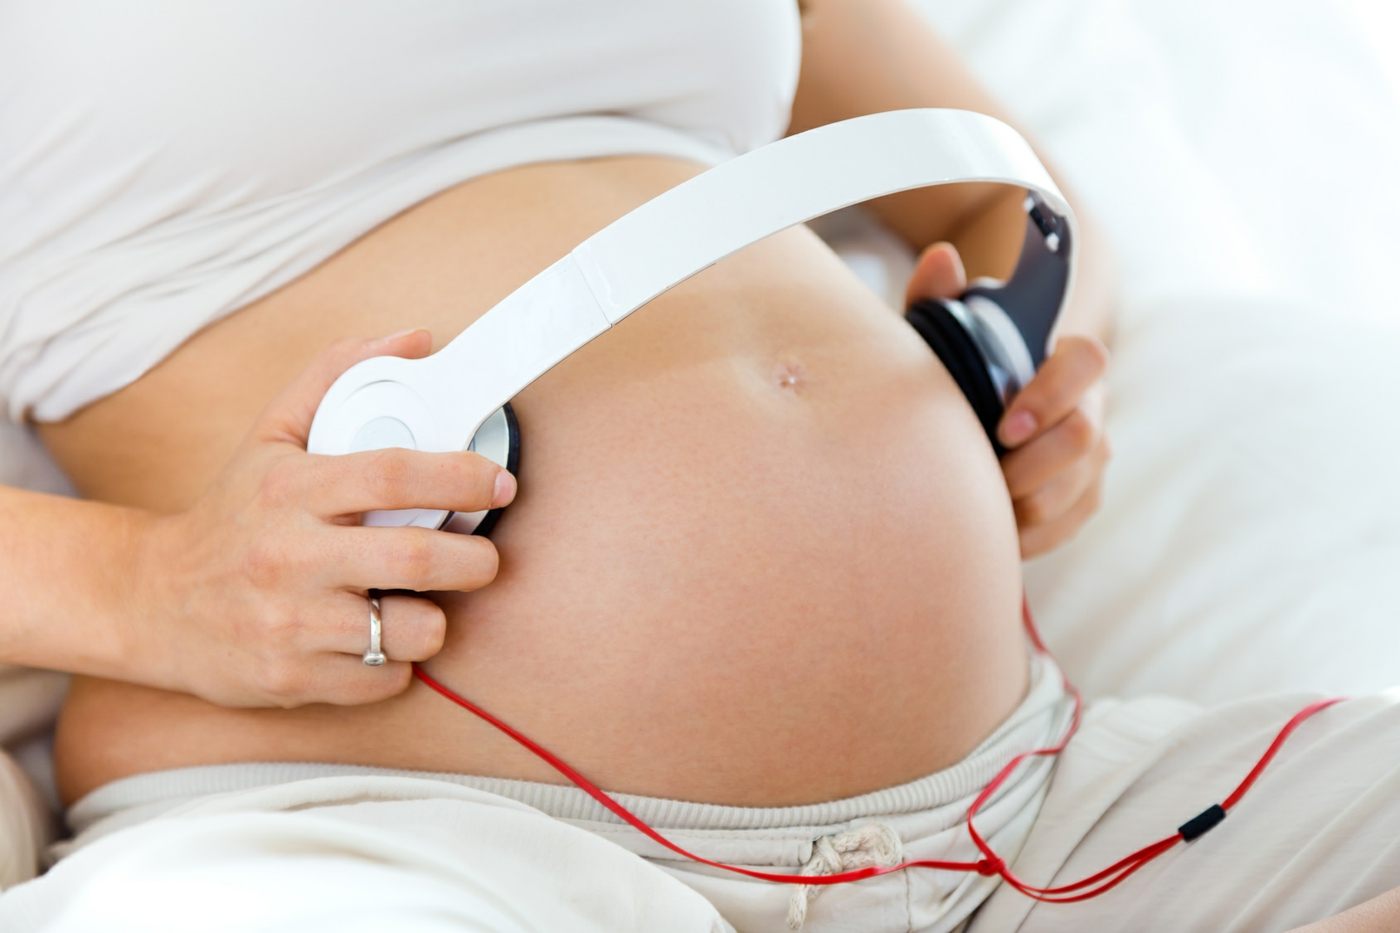 Baby strumming and playing music is still useful from the 30th SSW, as the hearing is trained